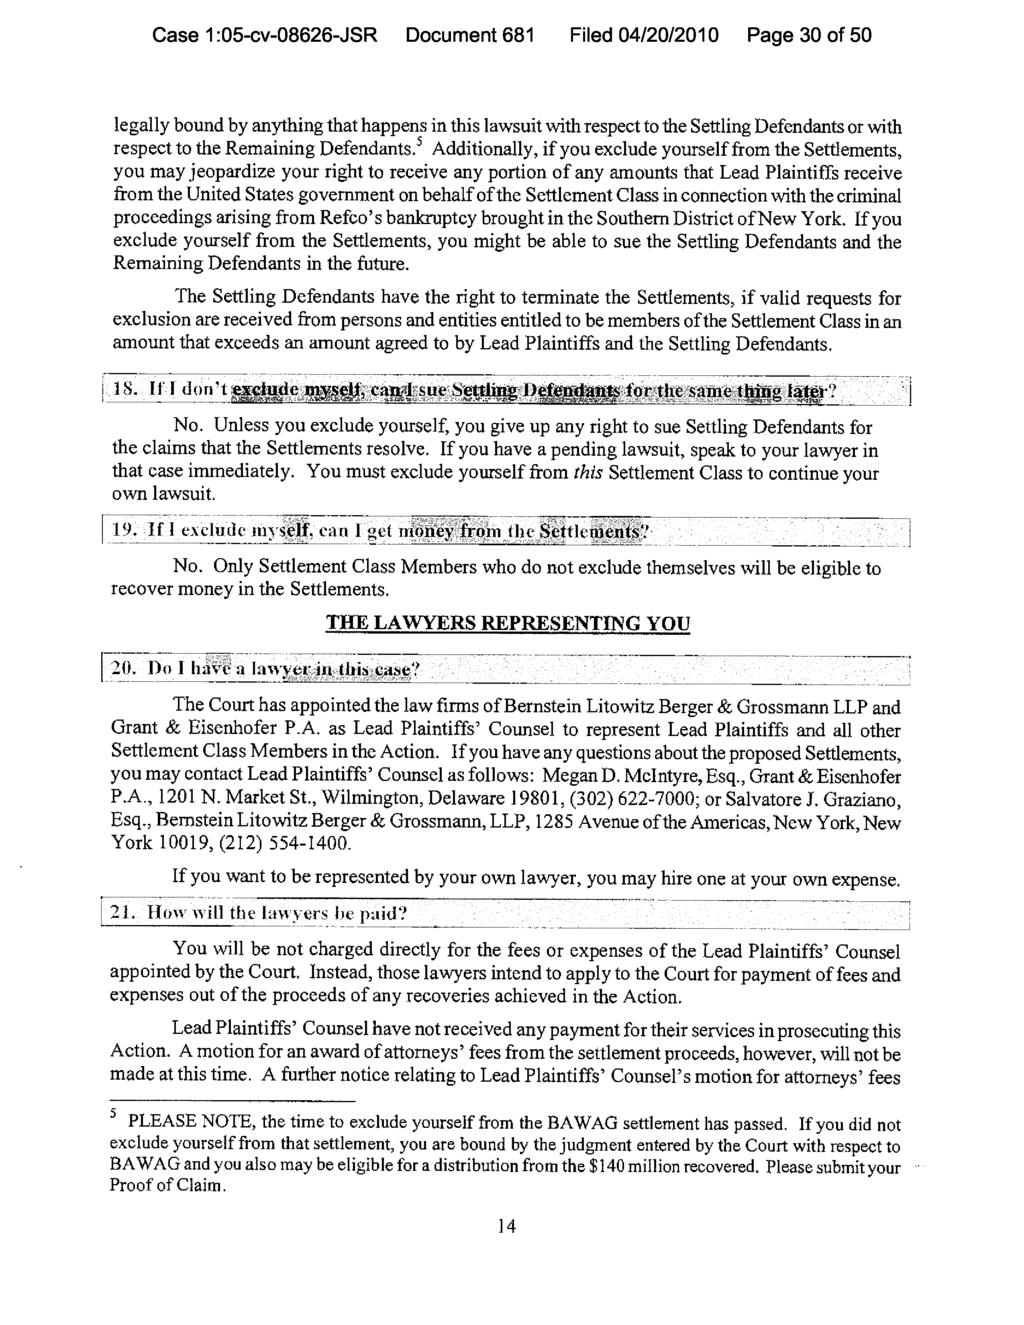 Case 1:05-cv-08626-JSR Document 681 Filed 04/20/2010 Page 30 of 50 legally bound by anything that happens in this lawsuit with respect to the Settling Defendants or with respect to the Remaining